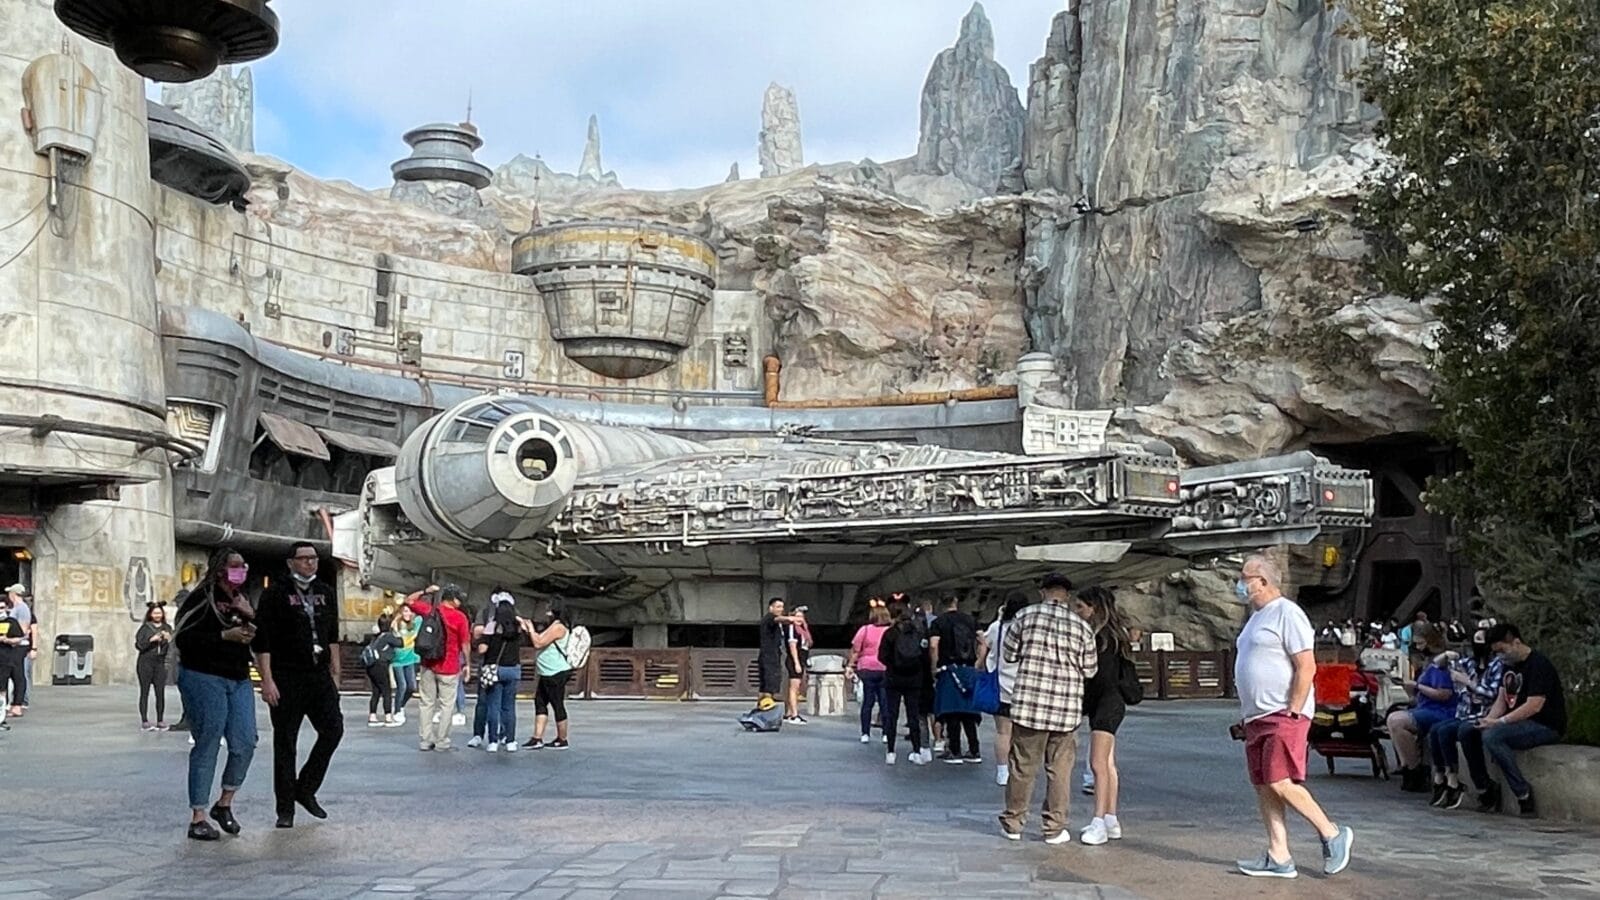 <p><strong>Same Galaxy, slightly difference orientation.</strong> As a visitor to Disney parks on both coasts, the Star Wars Galaxy’s Edge area will feel very similar with one exception: the lands are oriented slightly different. It’s just enough to make you have deja vu with the Disneyland version facing another direction and with more entrances/exits to other lands. They also have different food and drink options. For instance, the Oga’s Cantina at Disneyland recently started serving a new five-blossom bread which is basically a large pretzel with garlic dipping sauce but it isn’t available at the the Florida location. However, Walt Disney World was the the only location to get the now-defunct Galactic Starcruiser 2-day experience. <strong> Helpful tip:</strong> I’ve discovered that if you have a reservation at Oga’s in Disneyland this will usually guarantee you a table (but you might have to share it with strangers). At Oga’s in Walt Disney World in Florida, a reservation just gets you in the door and the tables are just pure luck.</p>